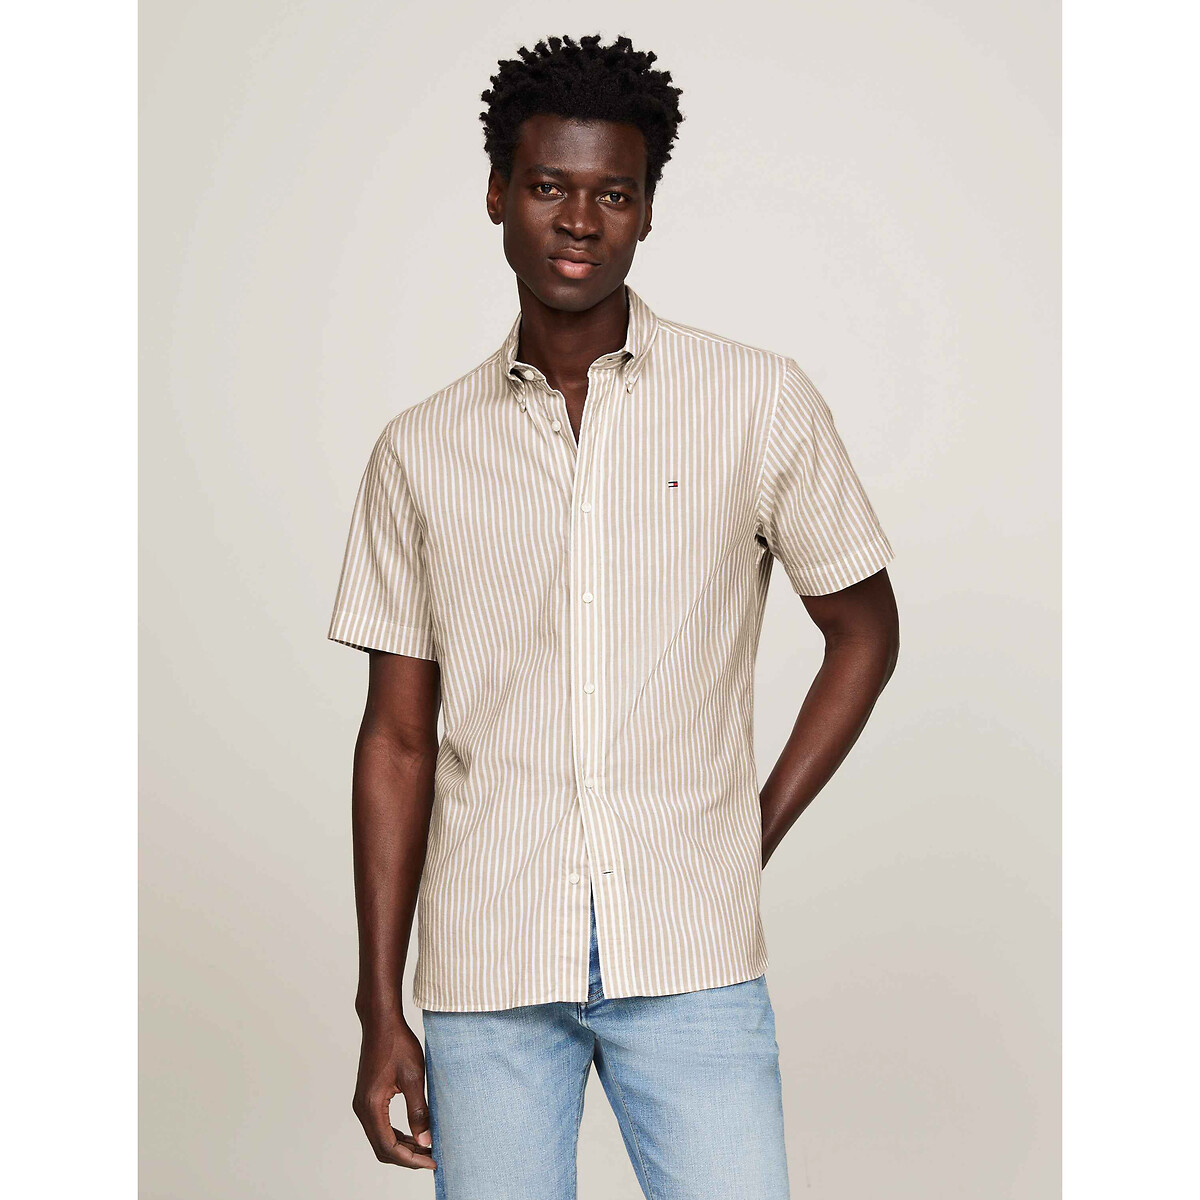 Image of Striped Shirt in Cotton/Linen Mix with Short Sleeves